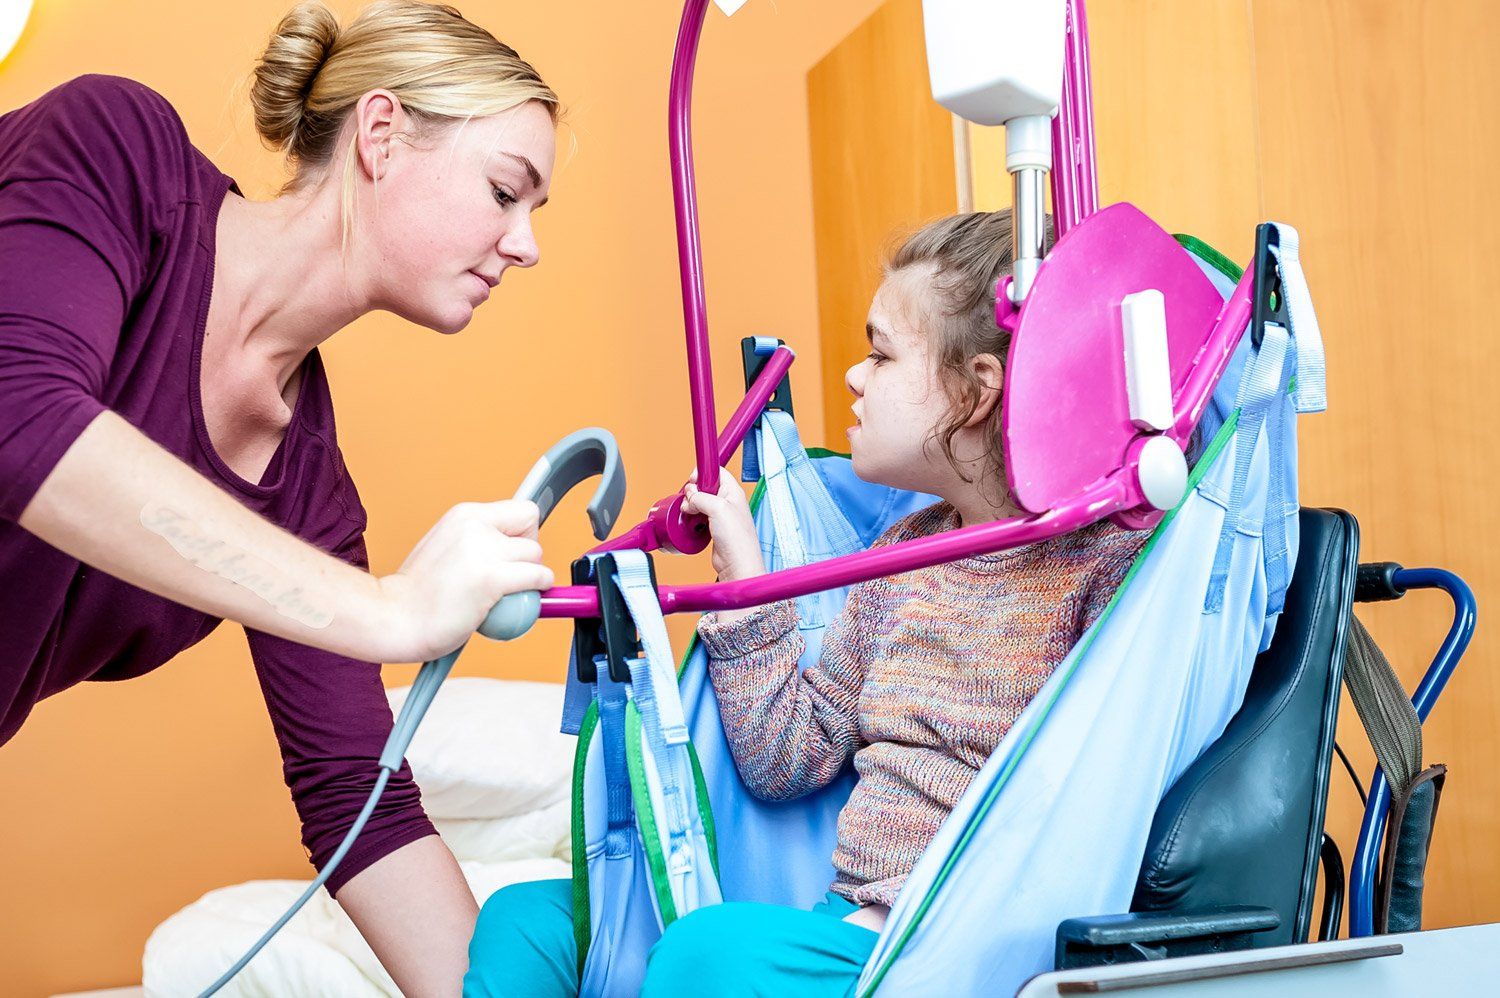 Care assistant assisting the disabled child